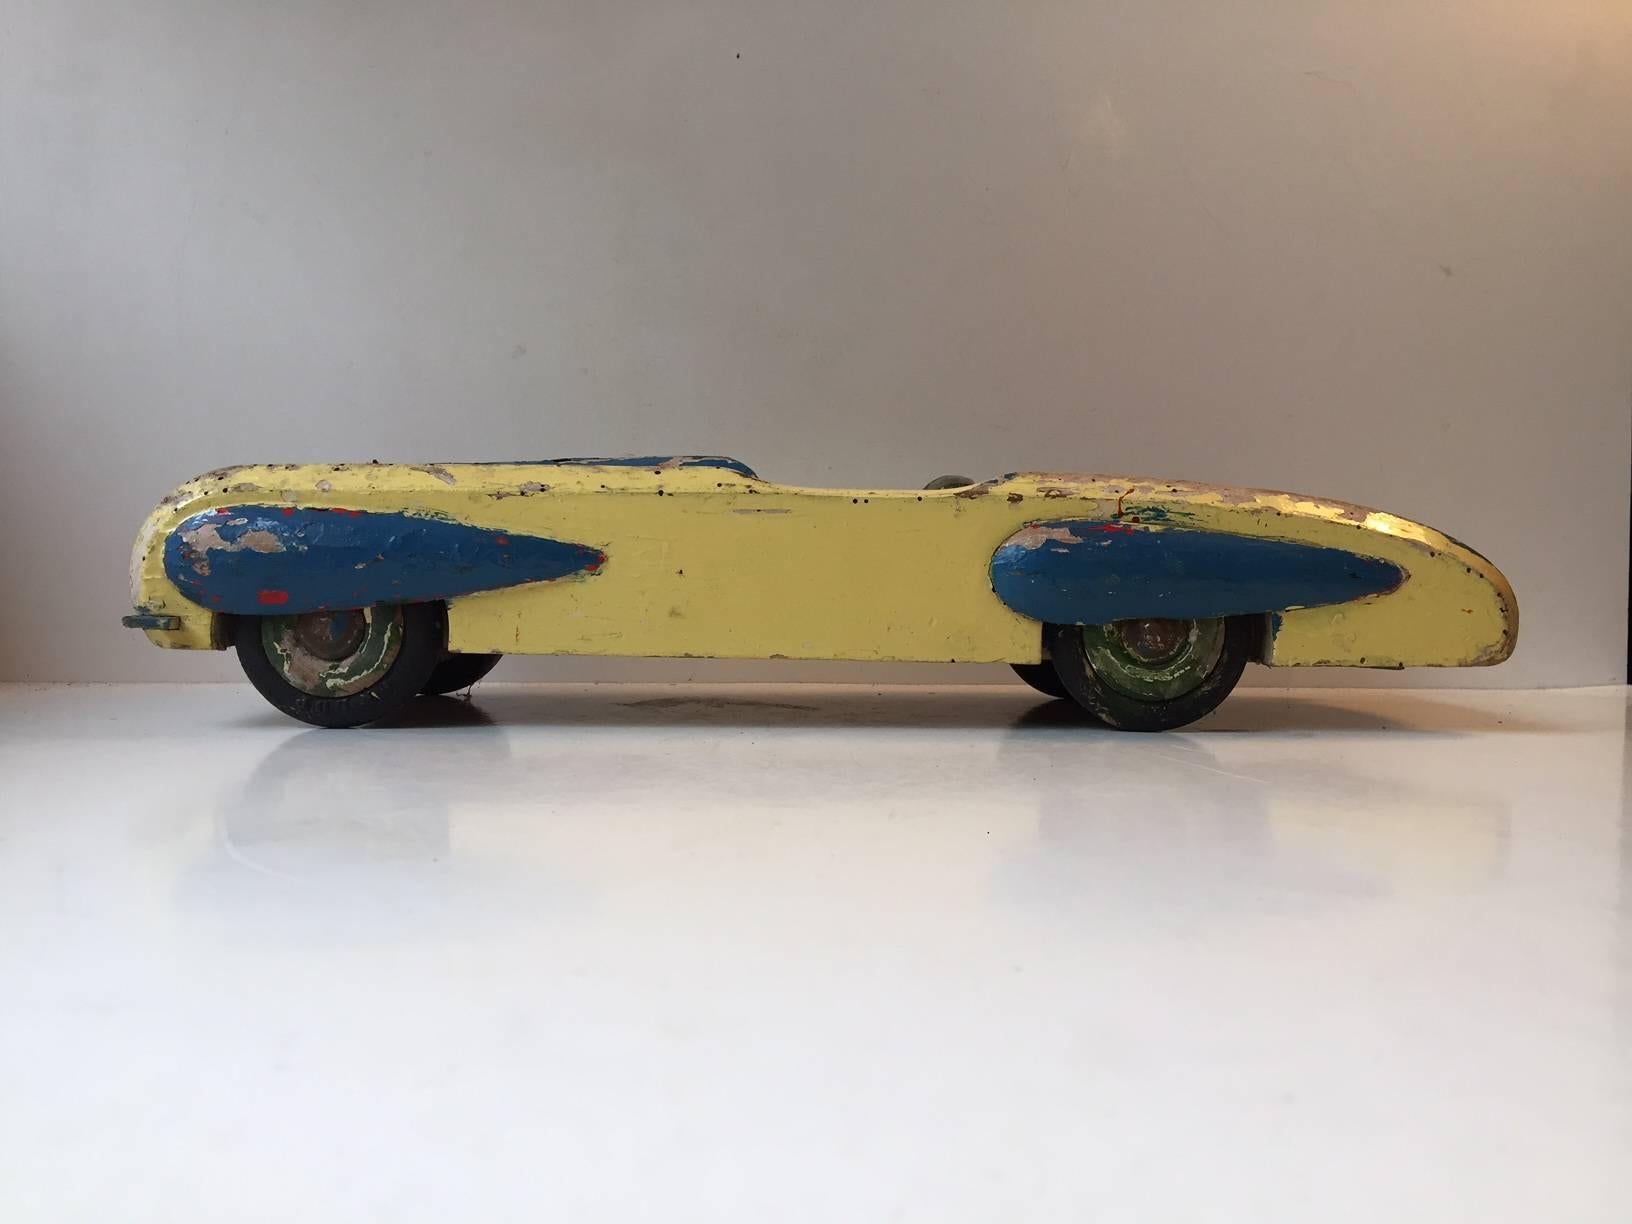 Large painted wooden Toy car with a lot of ware and personality. Numerous Worm-holes, several areas where the paint has worn off, a lot of scratches and scuffs - all around. Although it is mounted with Dunlop Tires this toy car is handmade in